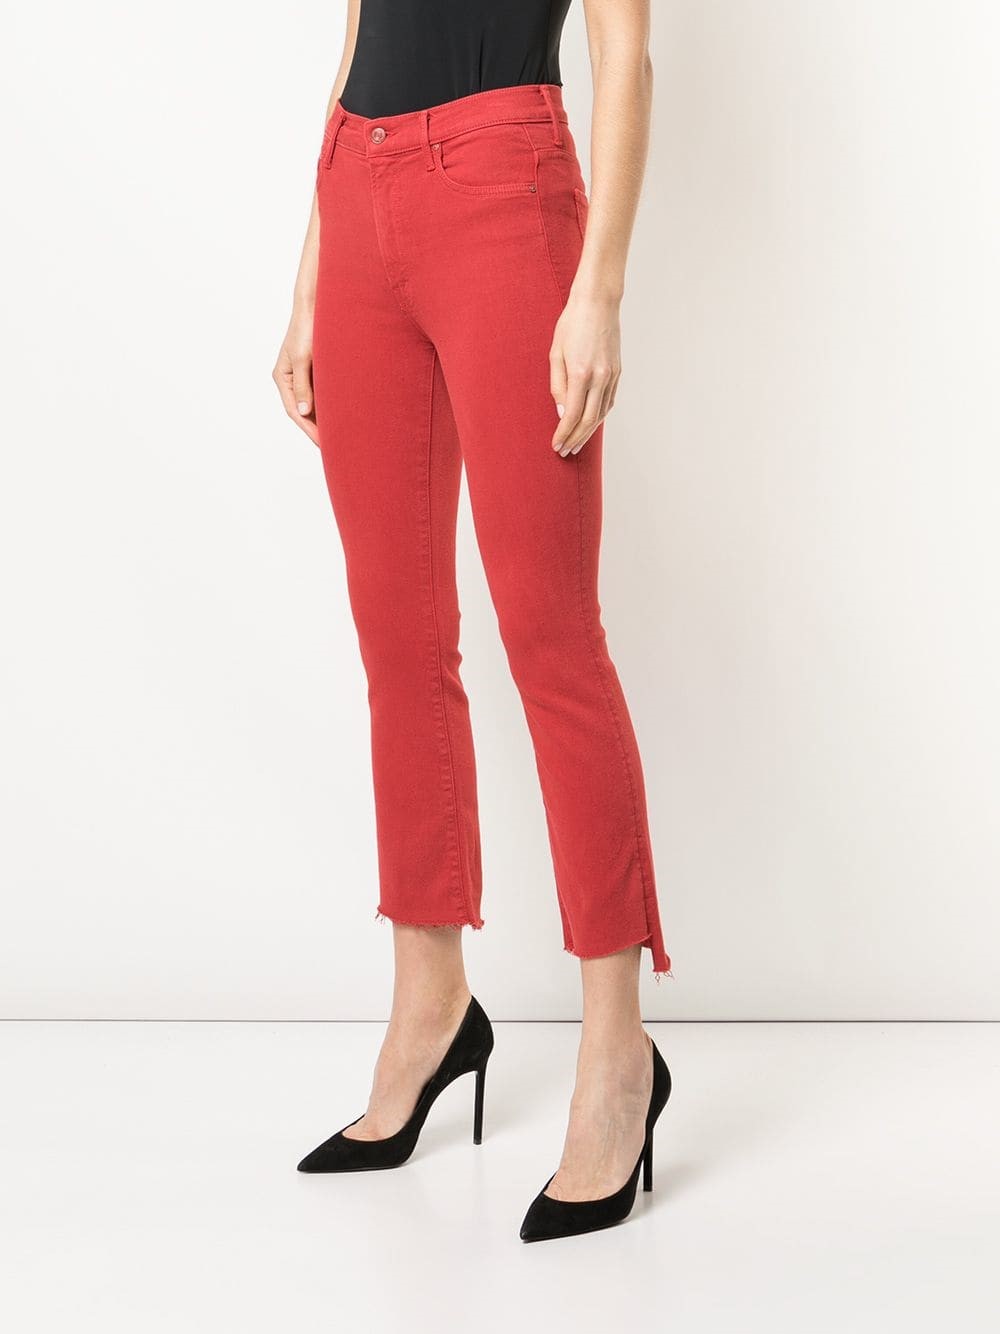 mother BOOT CUT JEANS available on montiboutique.com - 27432